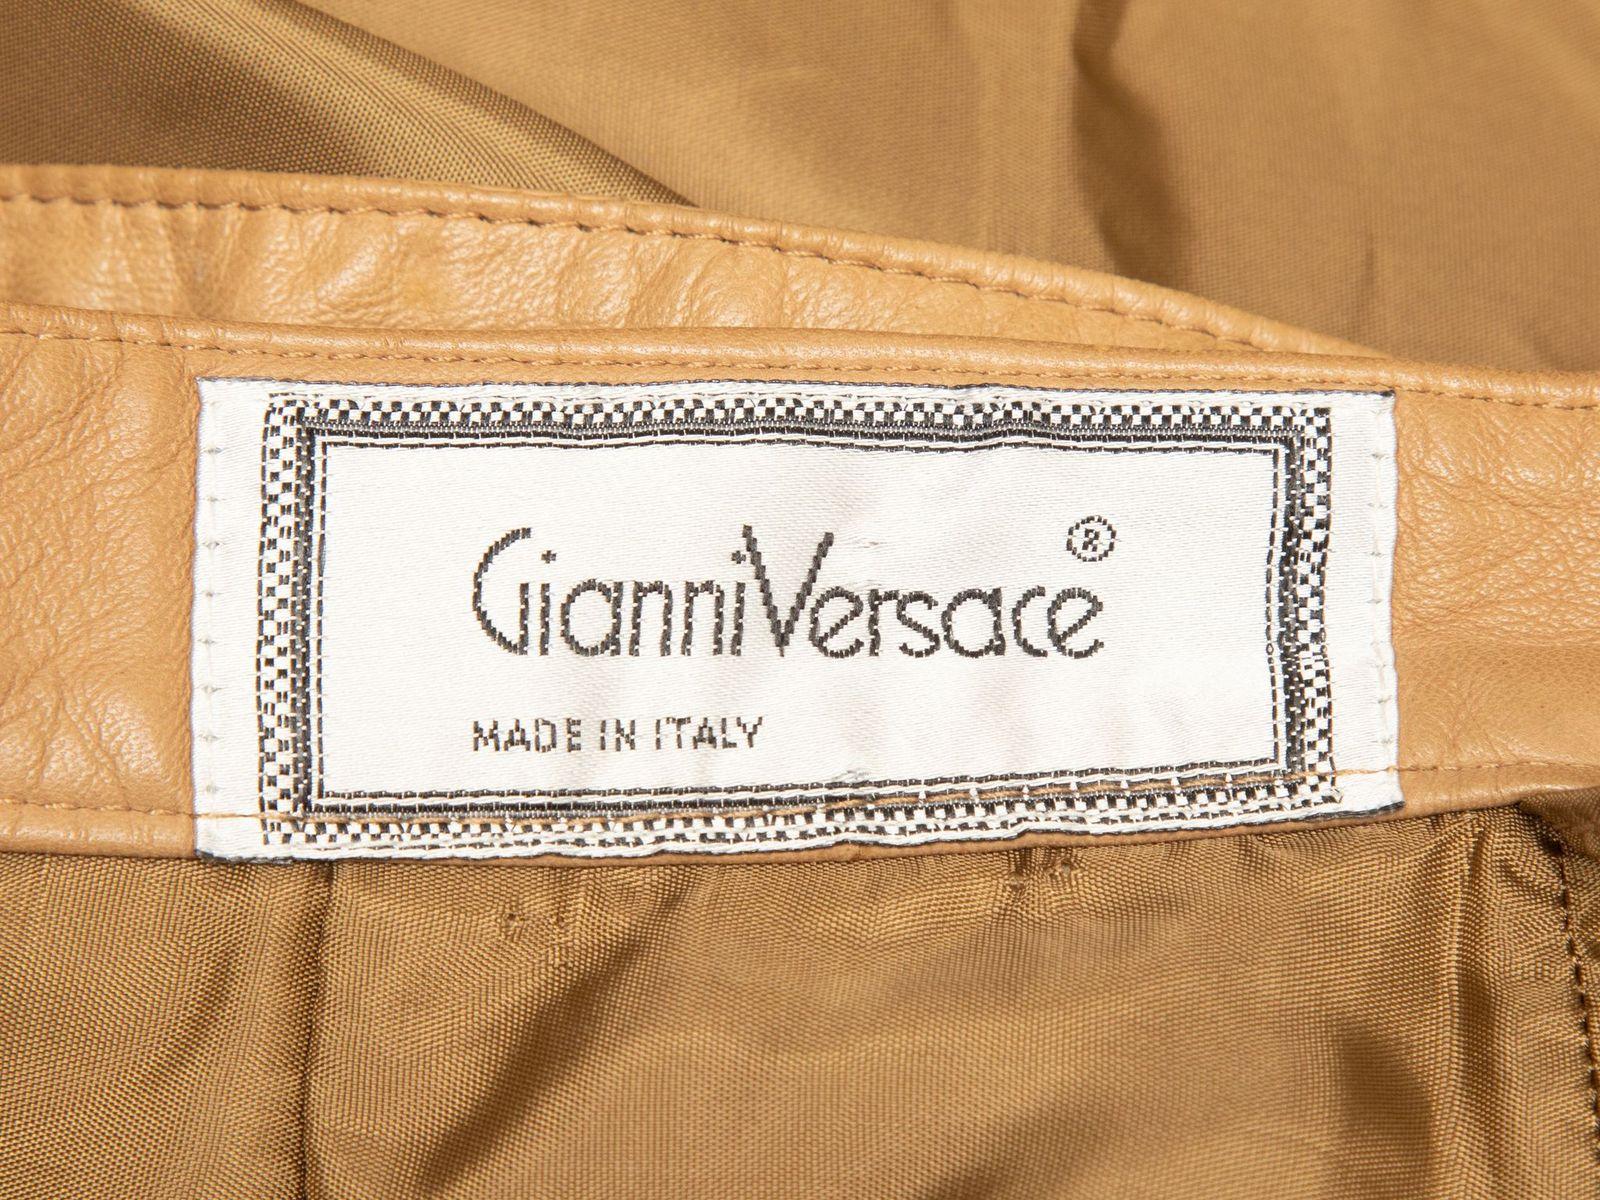 Product Details: Vintage tan leather wrap skirt by Gianni Versace. Button closure at waist. 24